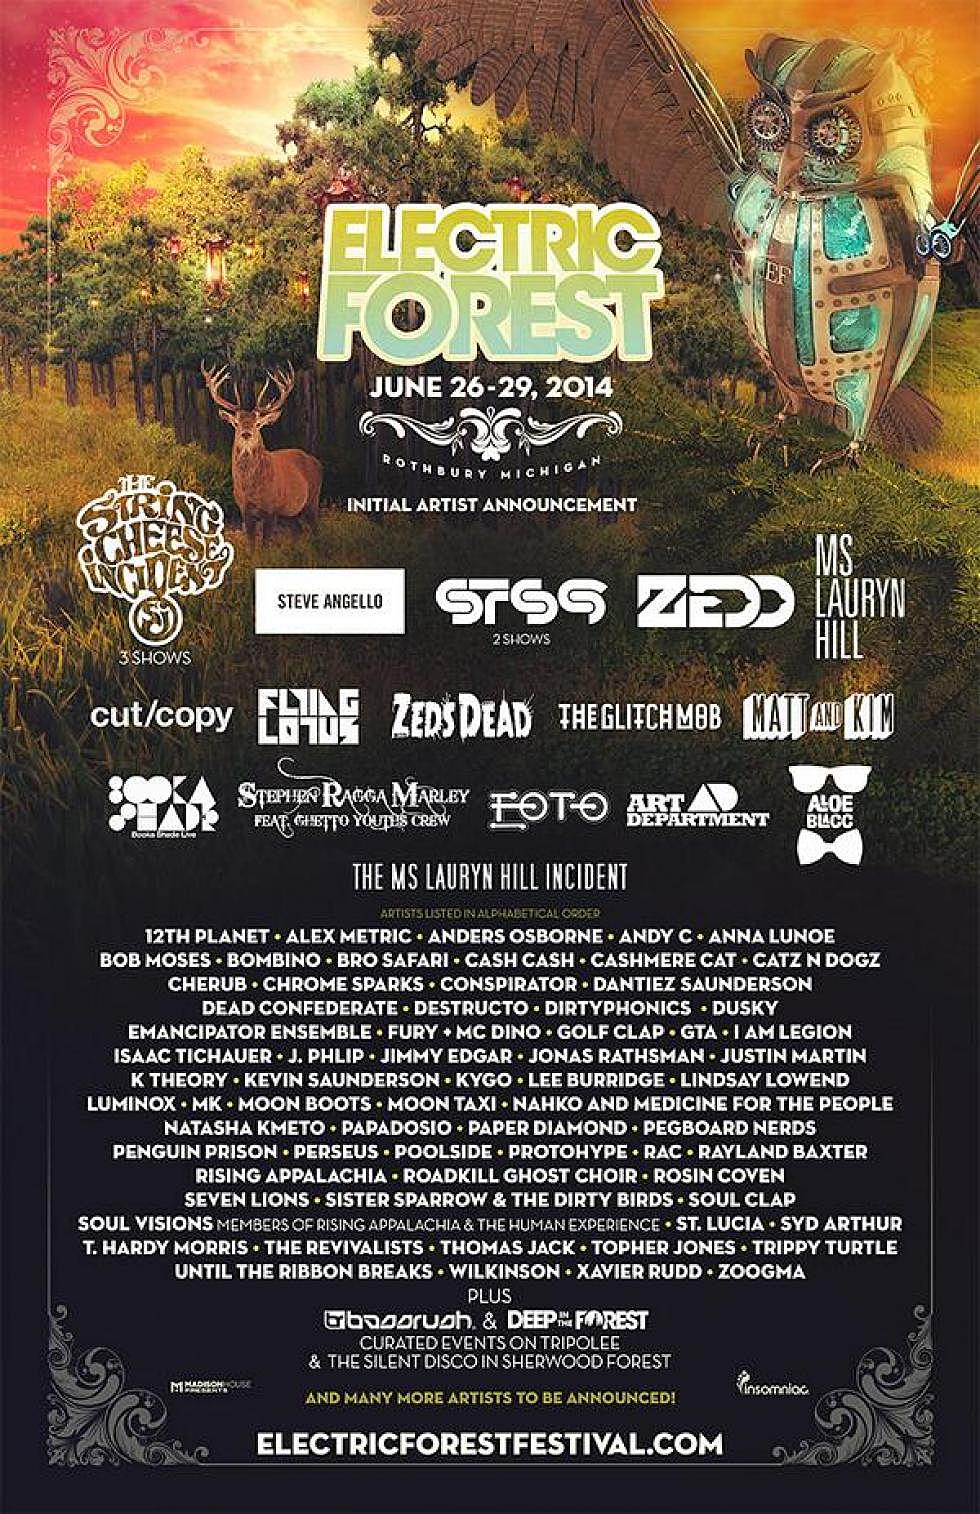 Electric Forest releases phase 1 of 2014 lineup